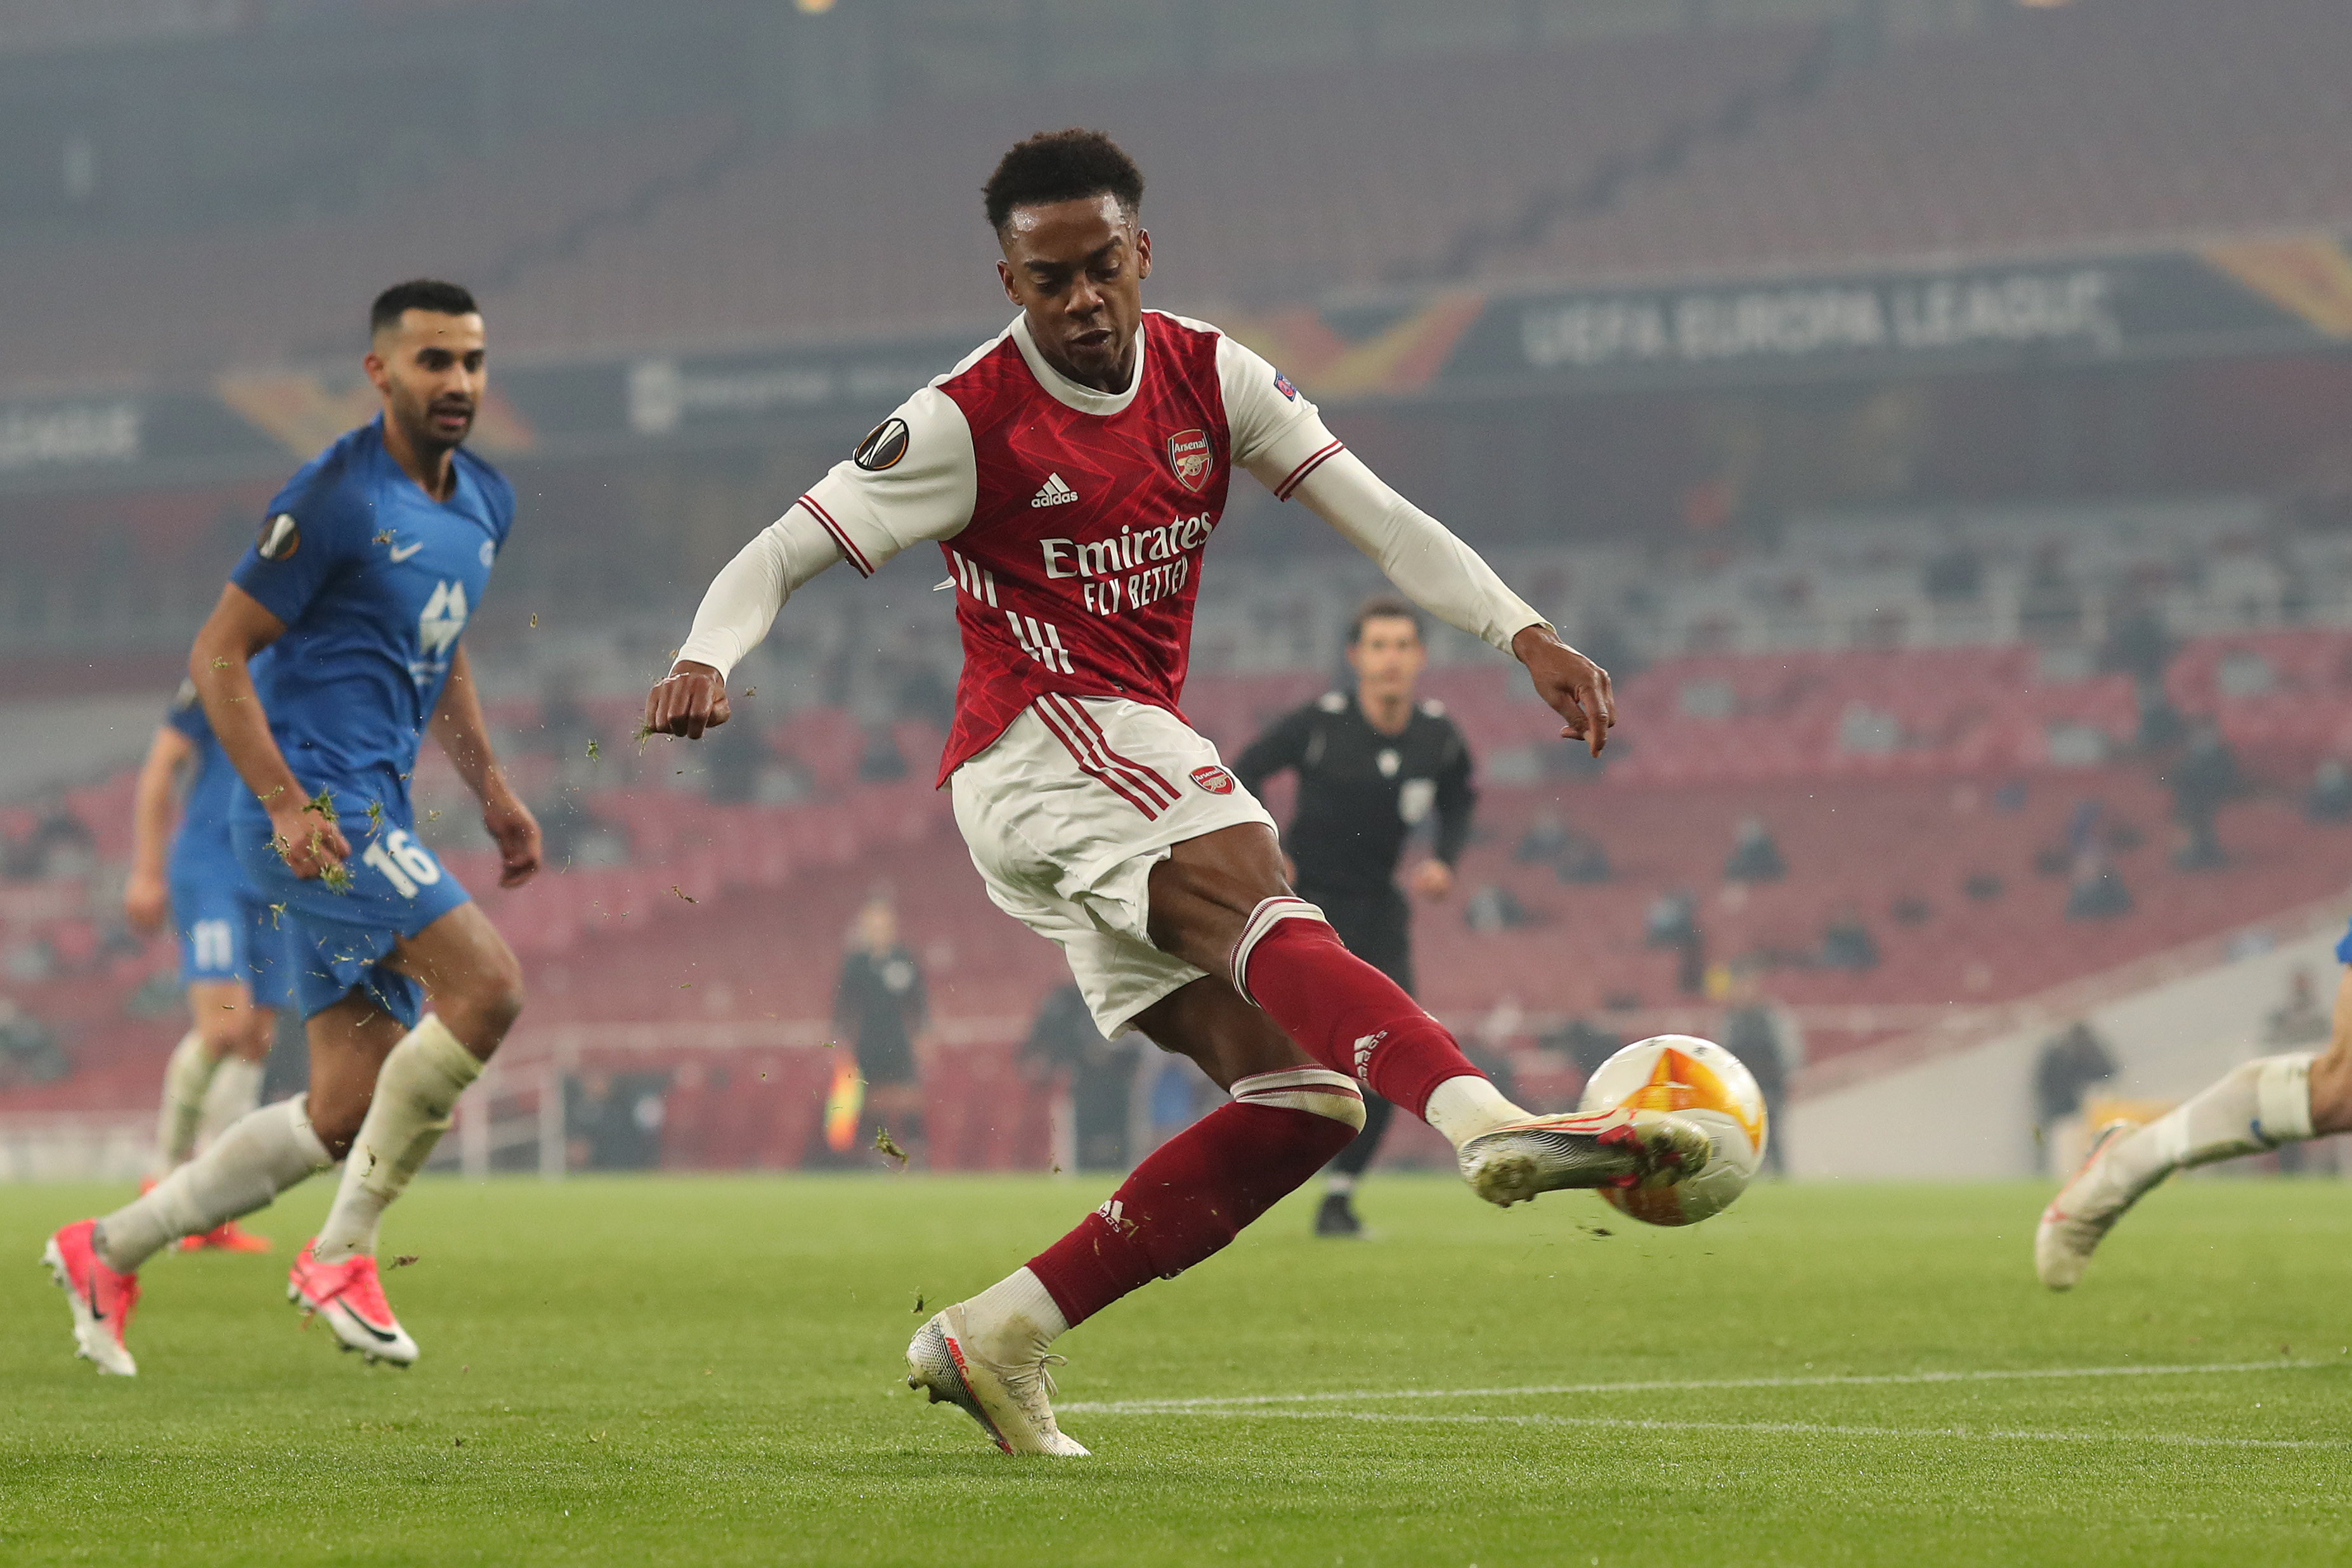 Can Willock be Arsenal's much-needed Ramsey replacement?